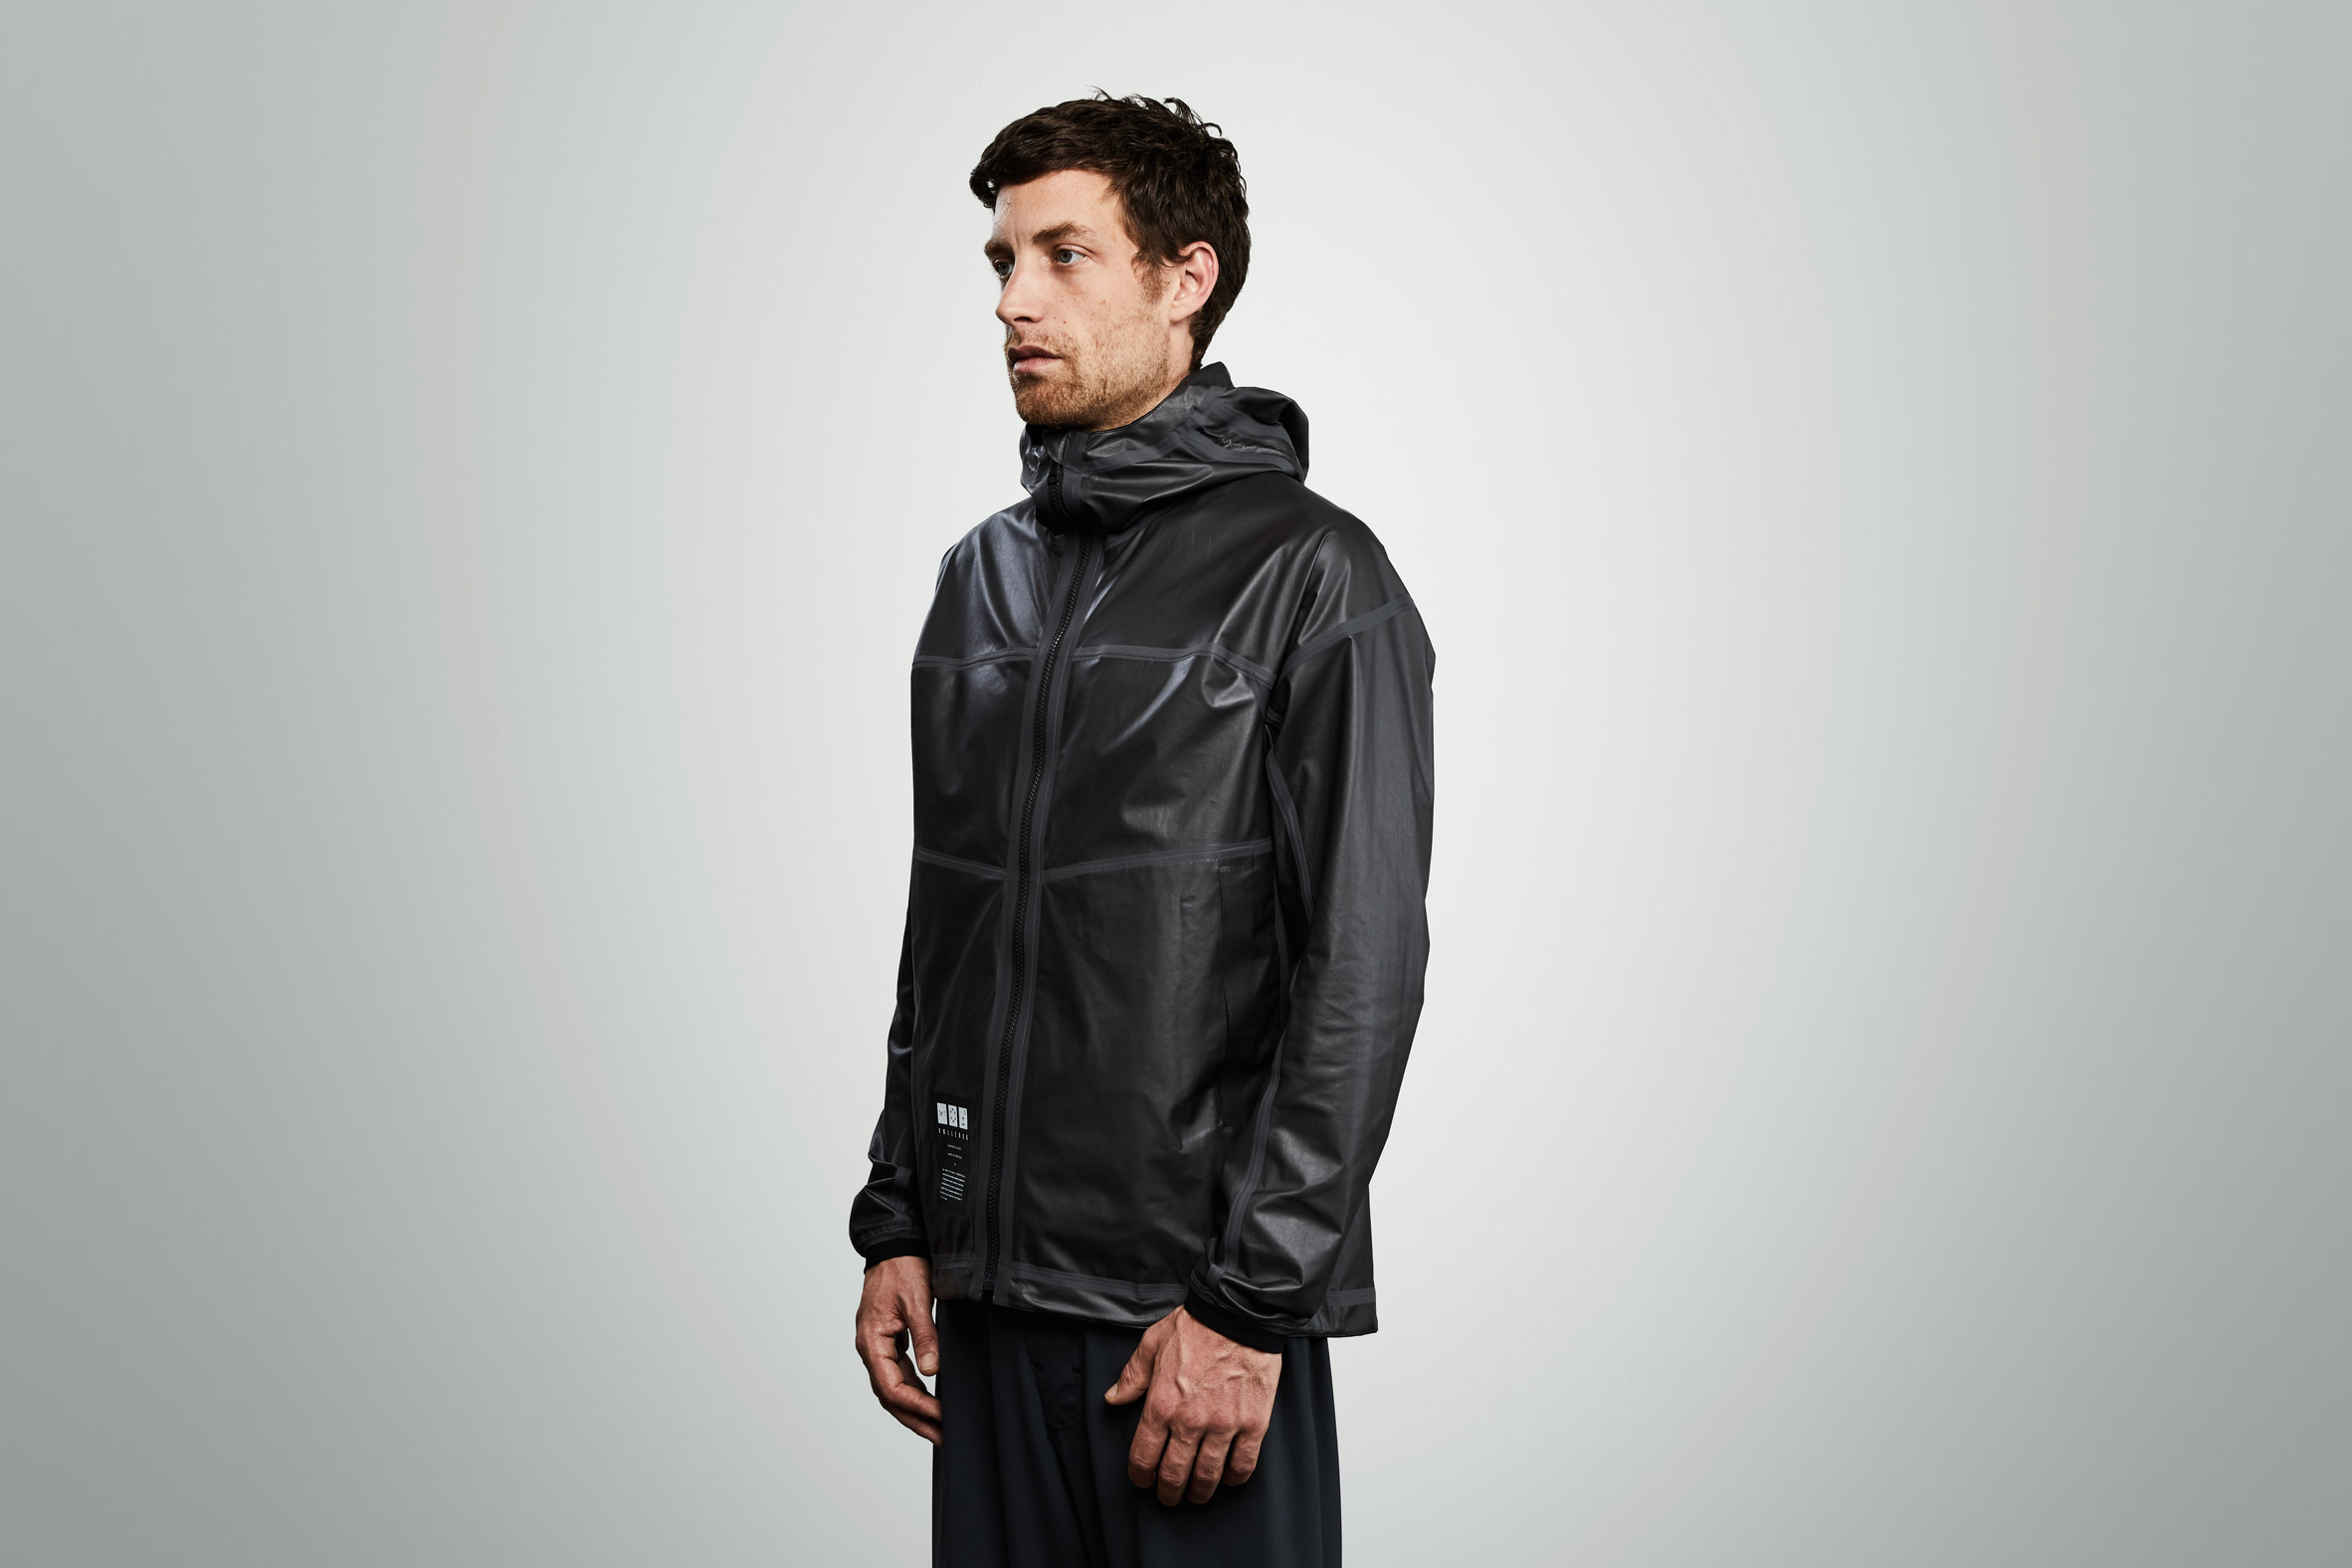 Vollebak launches first graphene jacket that acts as a radiator